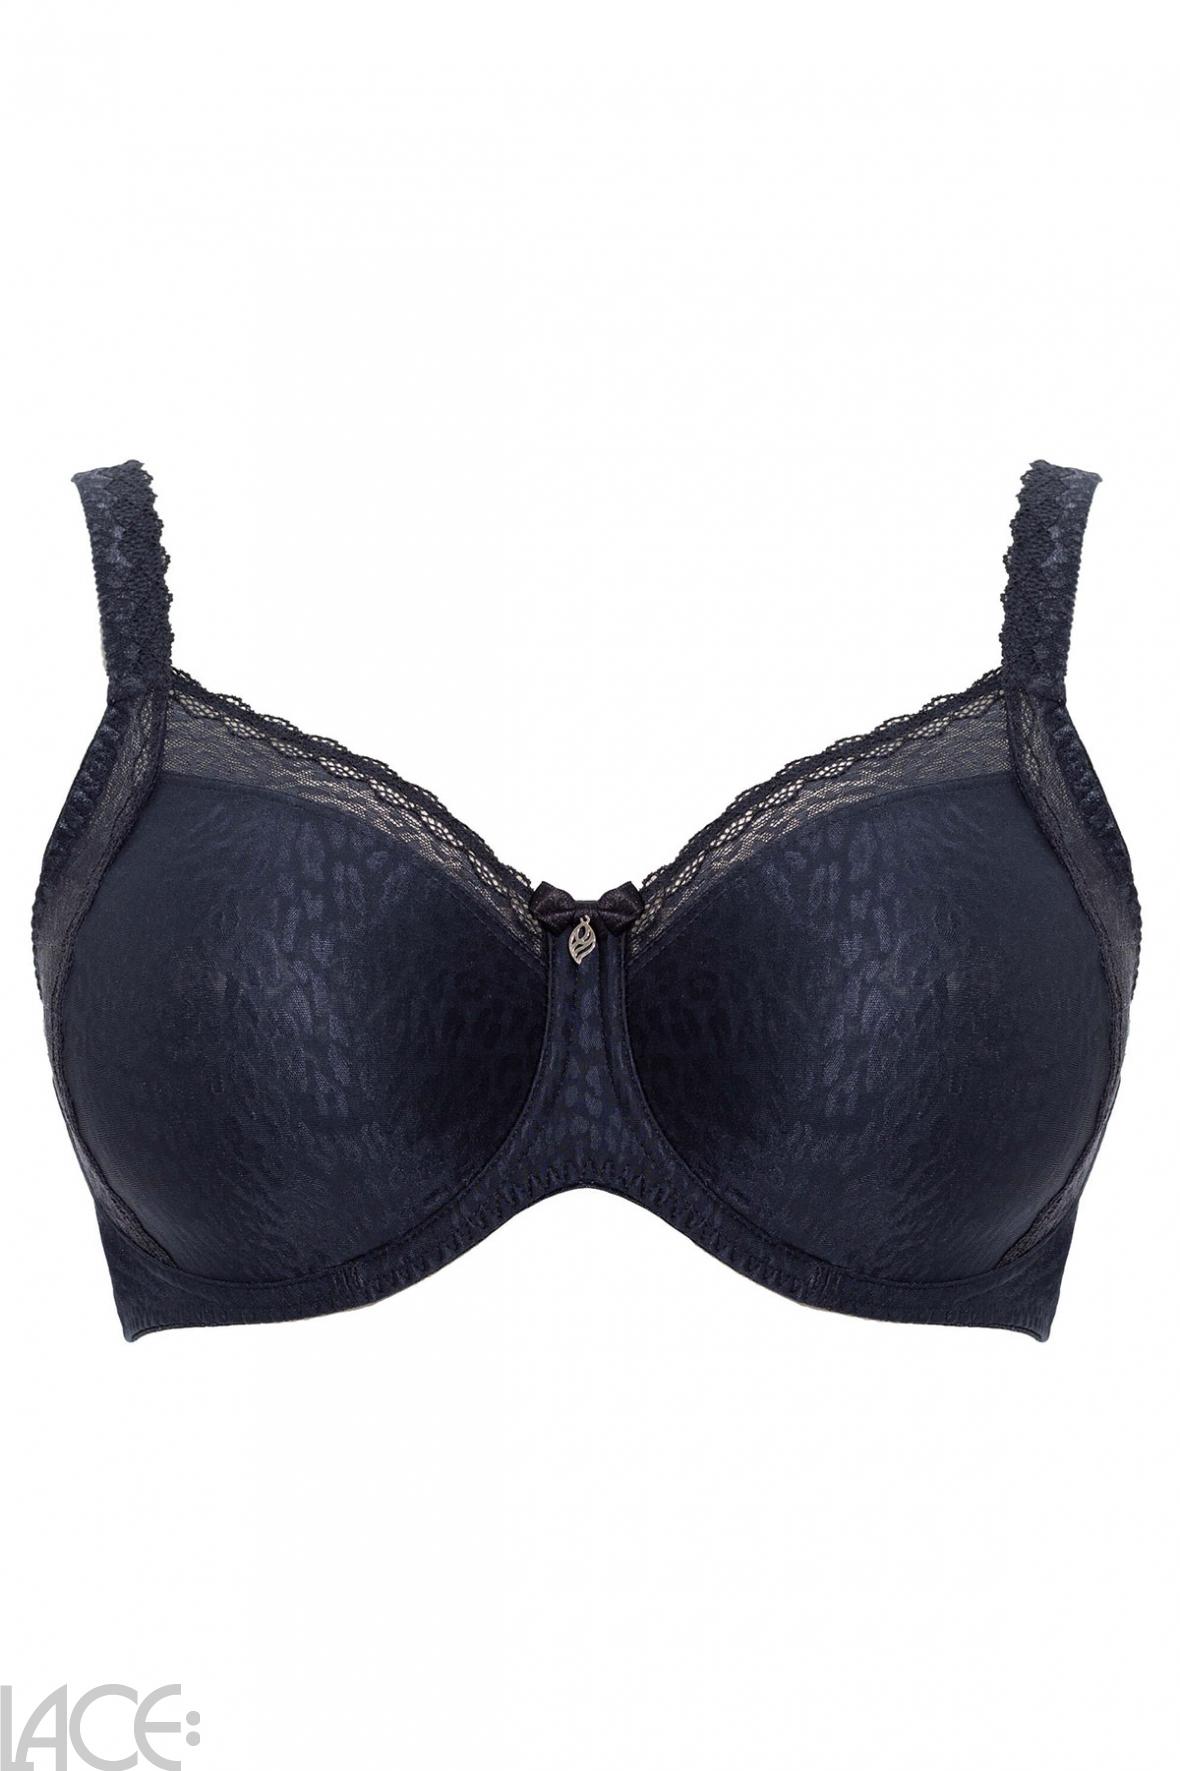 How to Find the Perfect Bra? – K.Lynn Lingerie